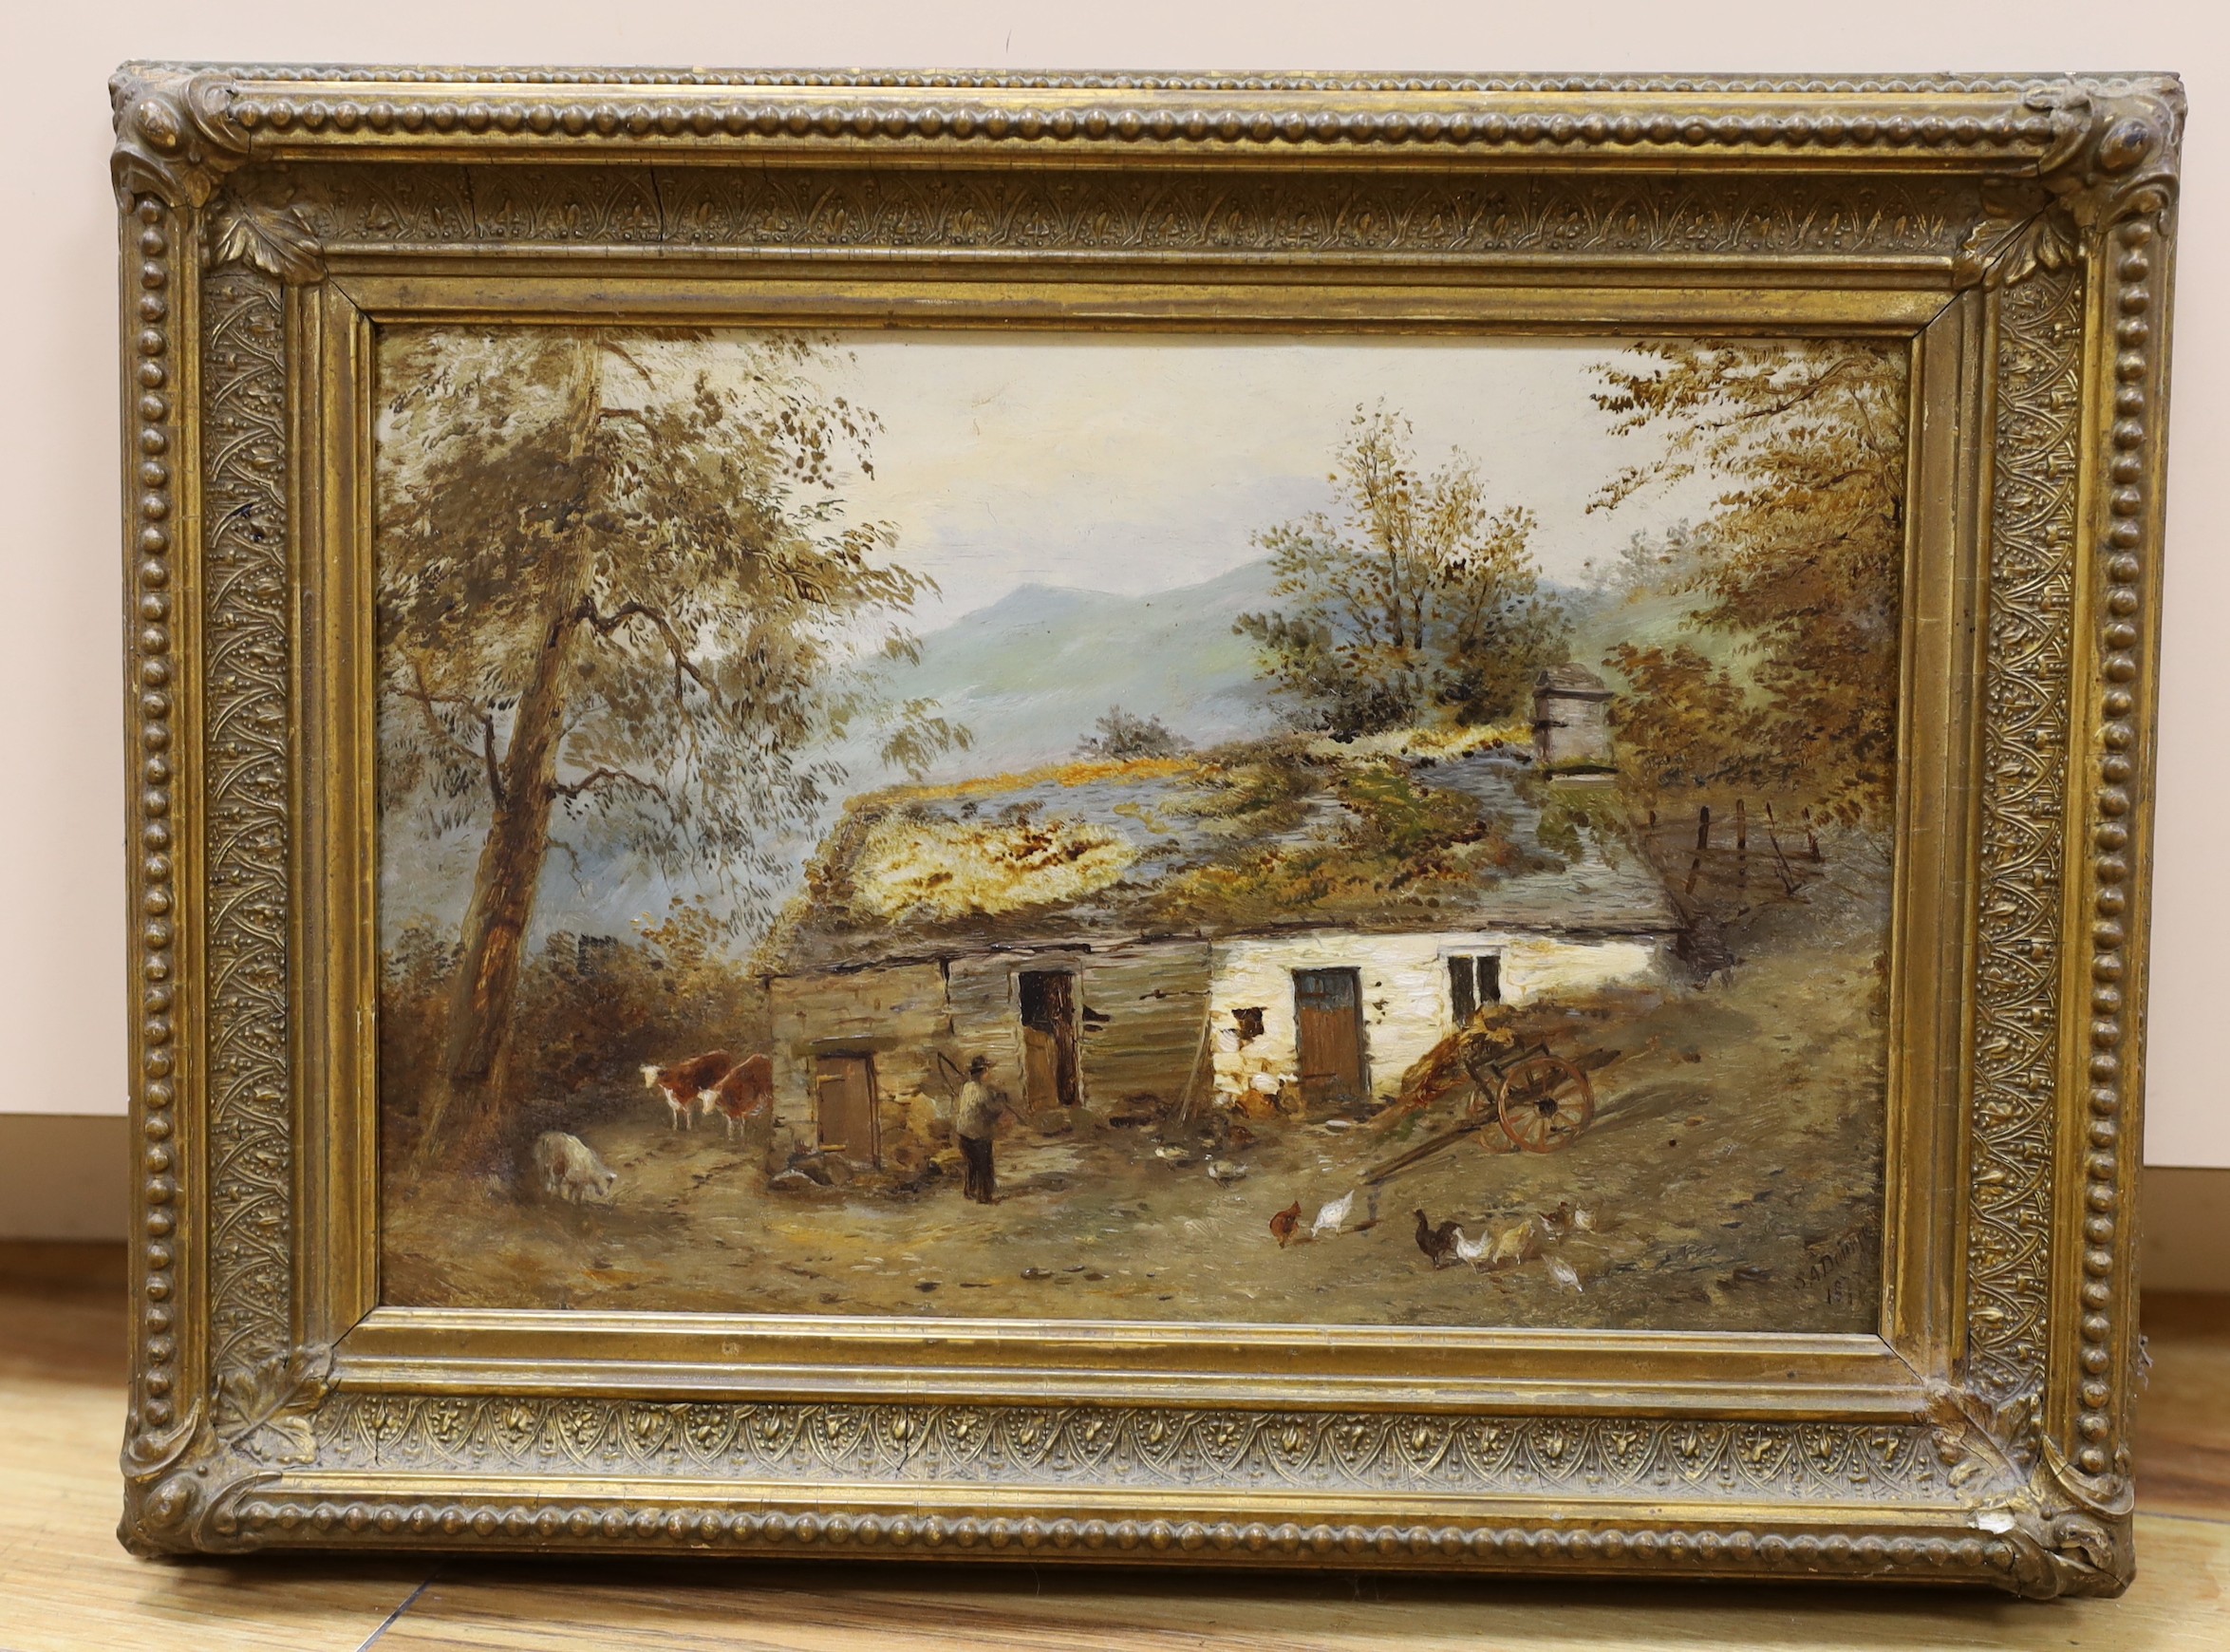 Victorian School, oil on millboard, Crofter's cottage with figure and livestock, signed and dated 1877, 19 x 29cm